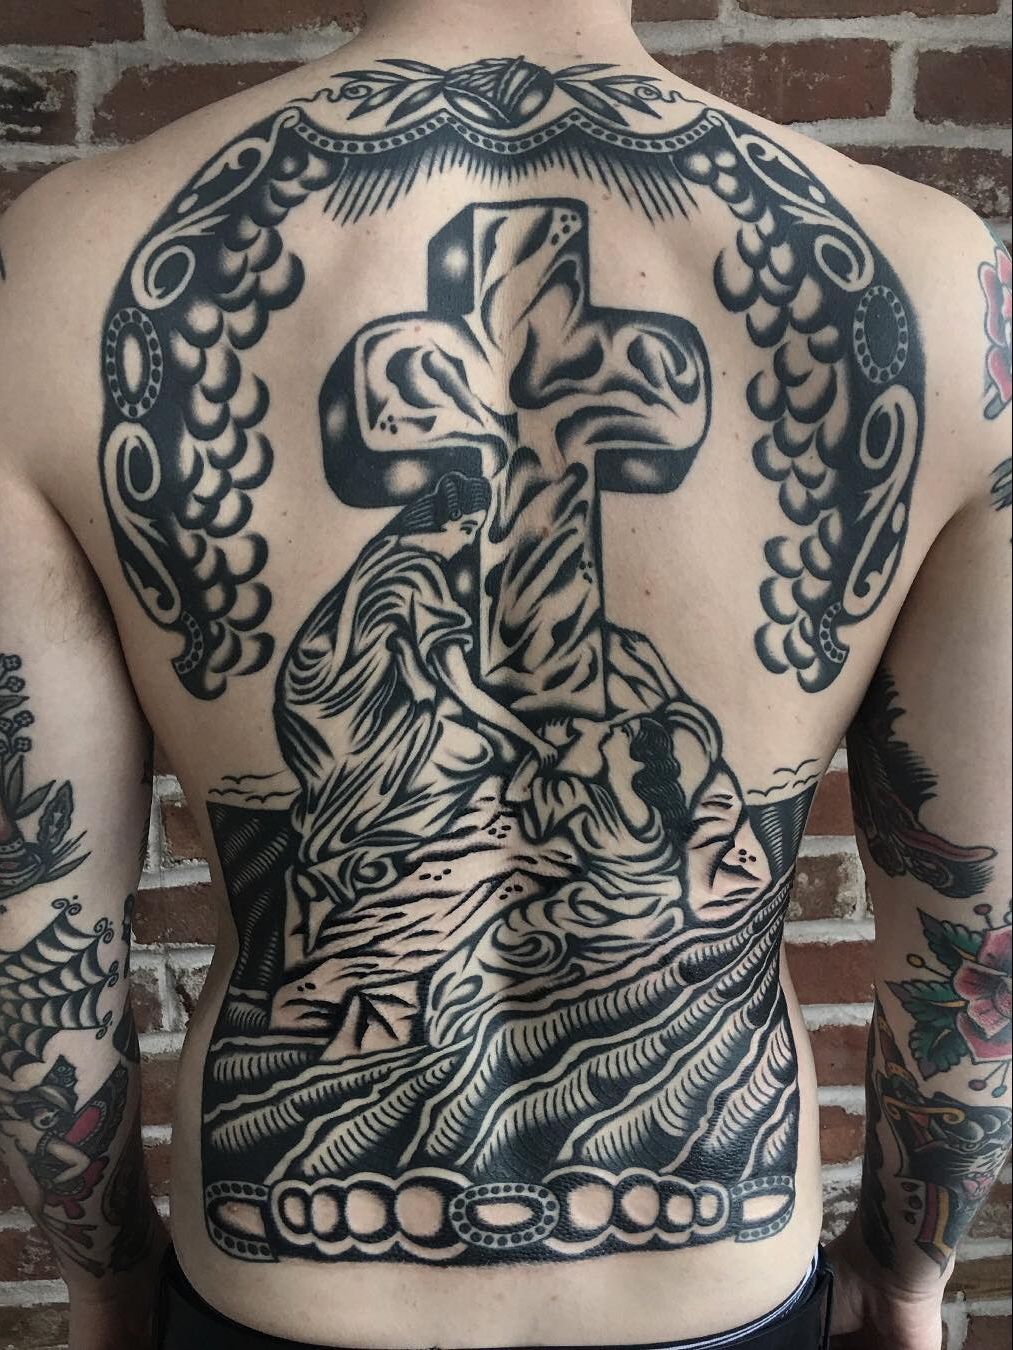 Made some more progress on this huge crucifix coverup back piece for Ryan  @sweetwatercollective Always a pleasure my dude 🙏🏼 Gettin... | Instagram